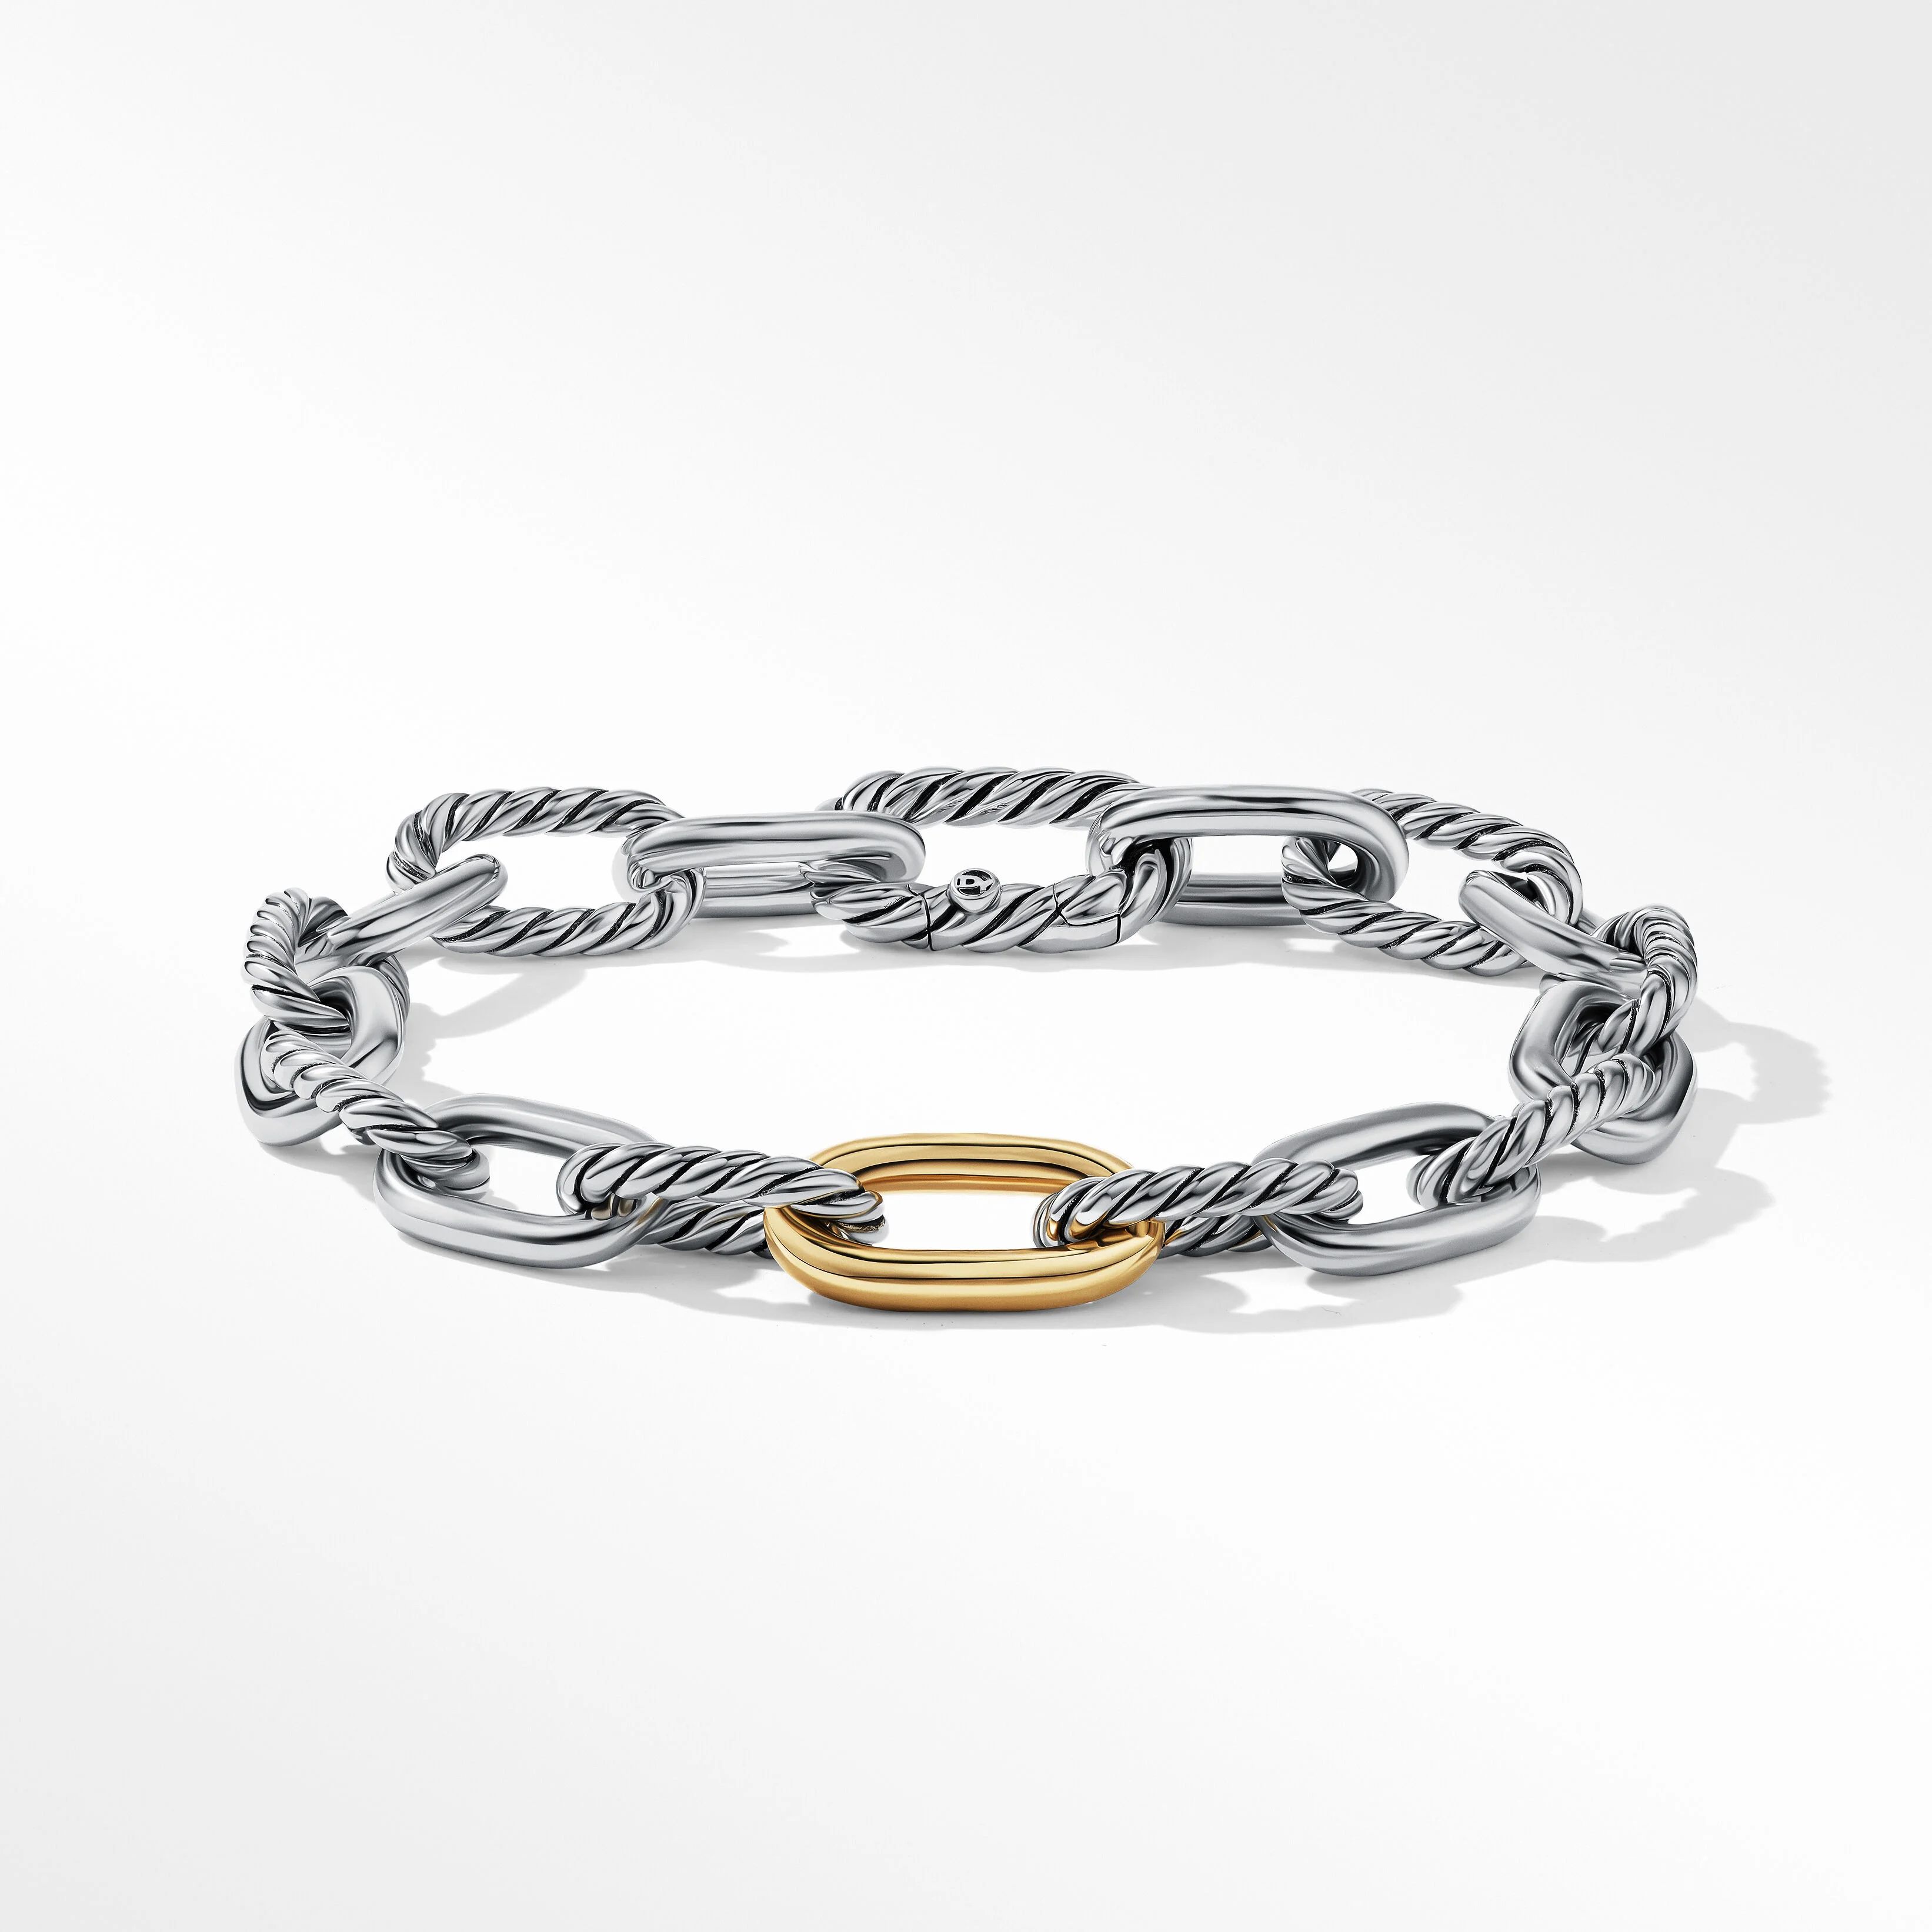 DY Madison® Chain Bracelet in Sterling Silver with 18K Yellow Gold | David Yurman